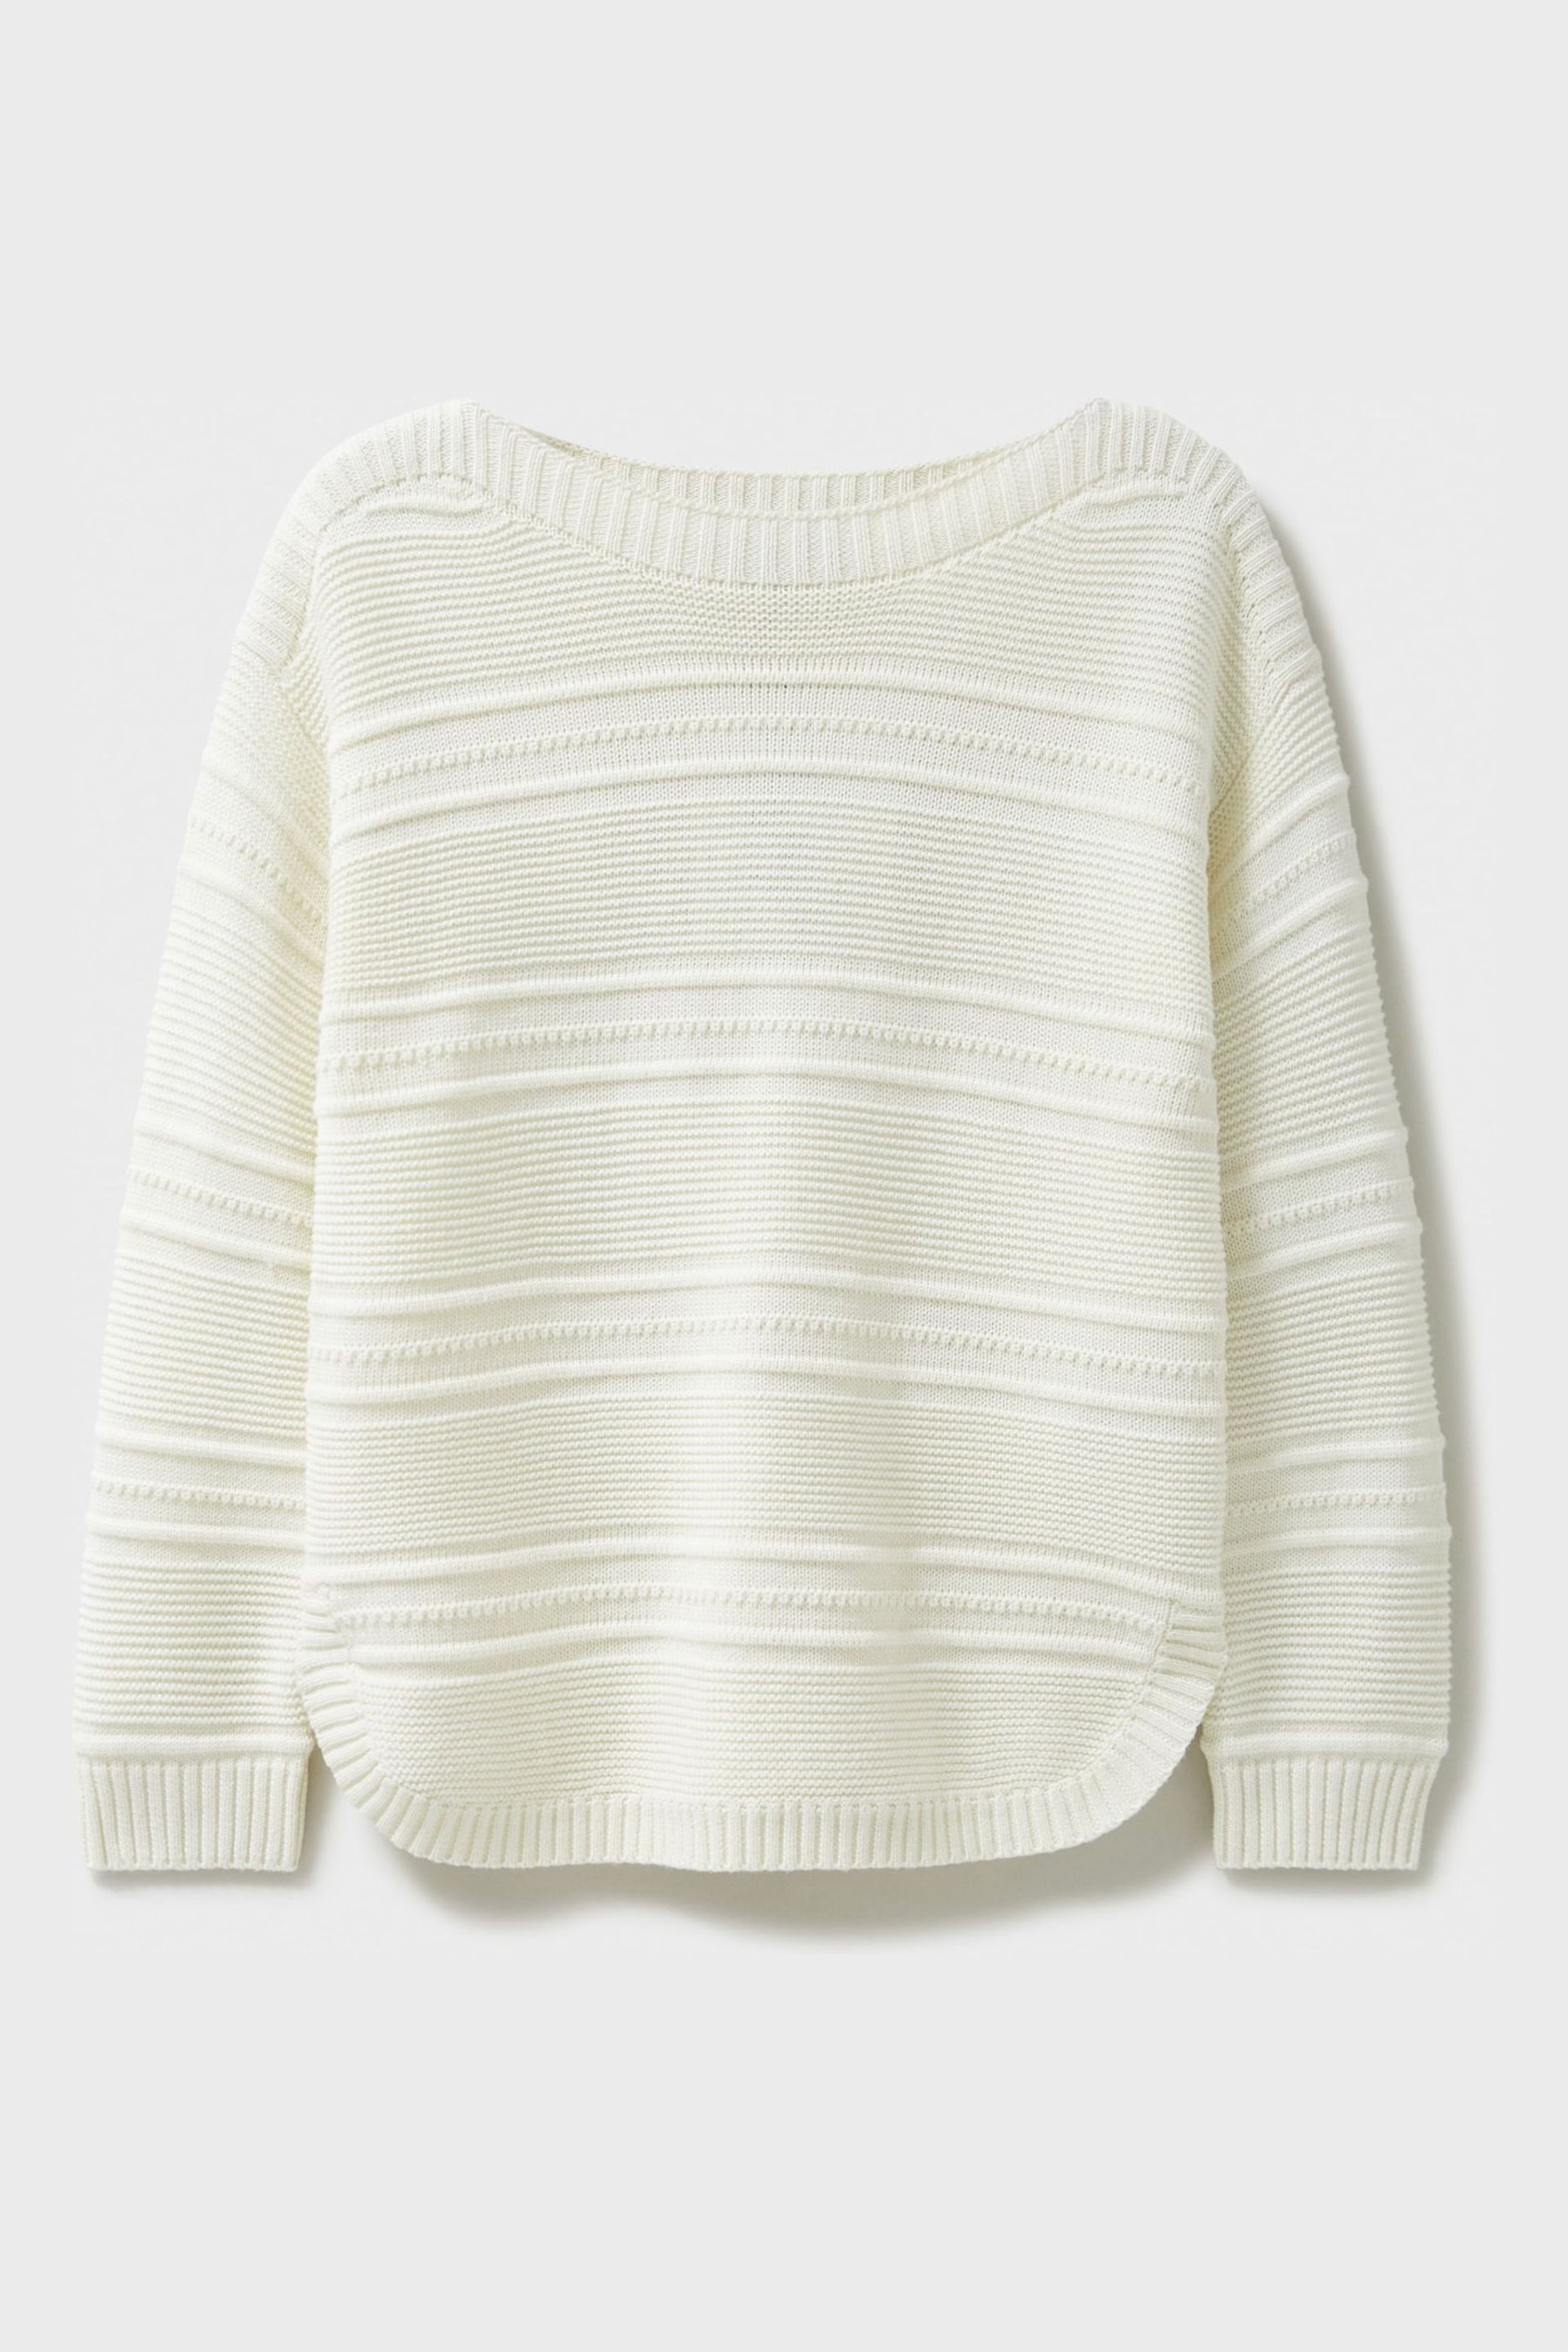 Crew Clothing Tali Knit Jumper - Image 5 of 5